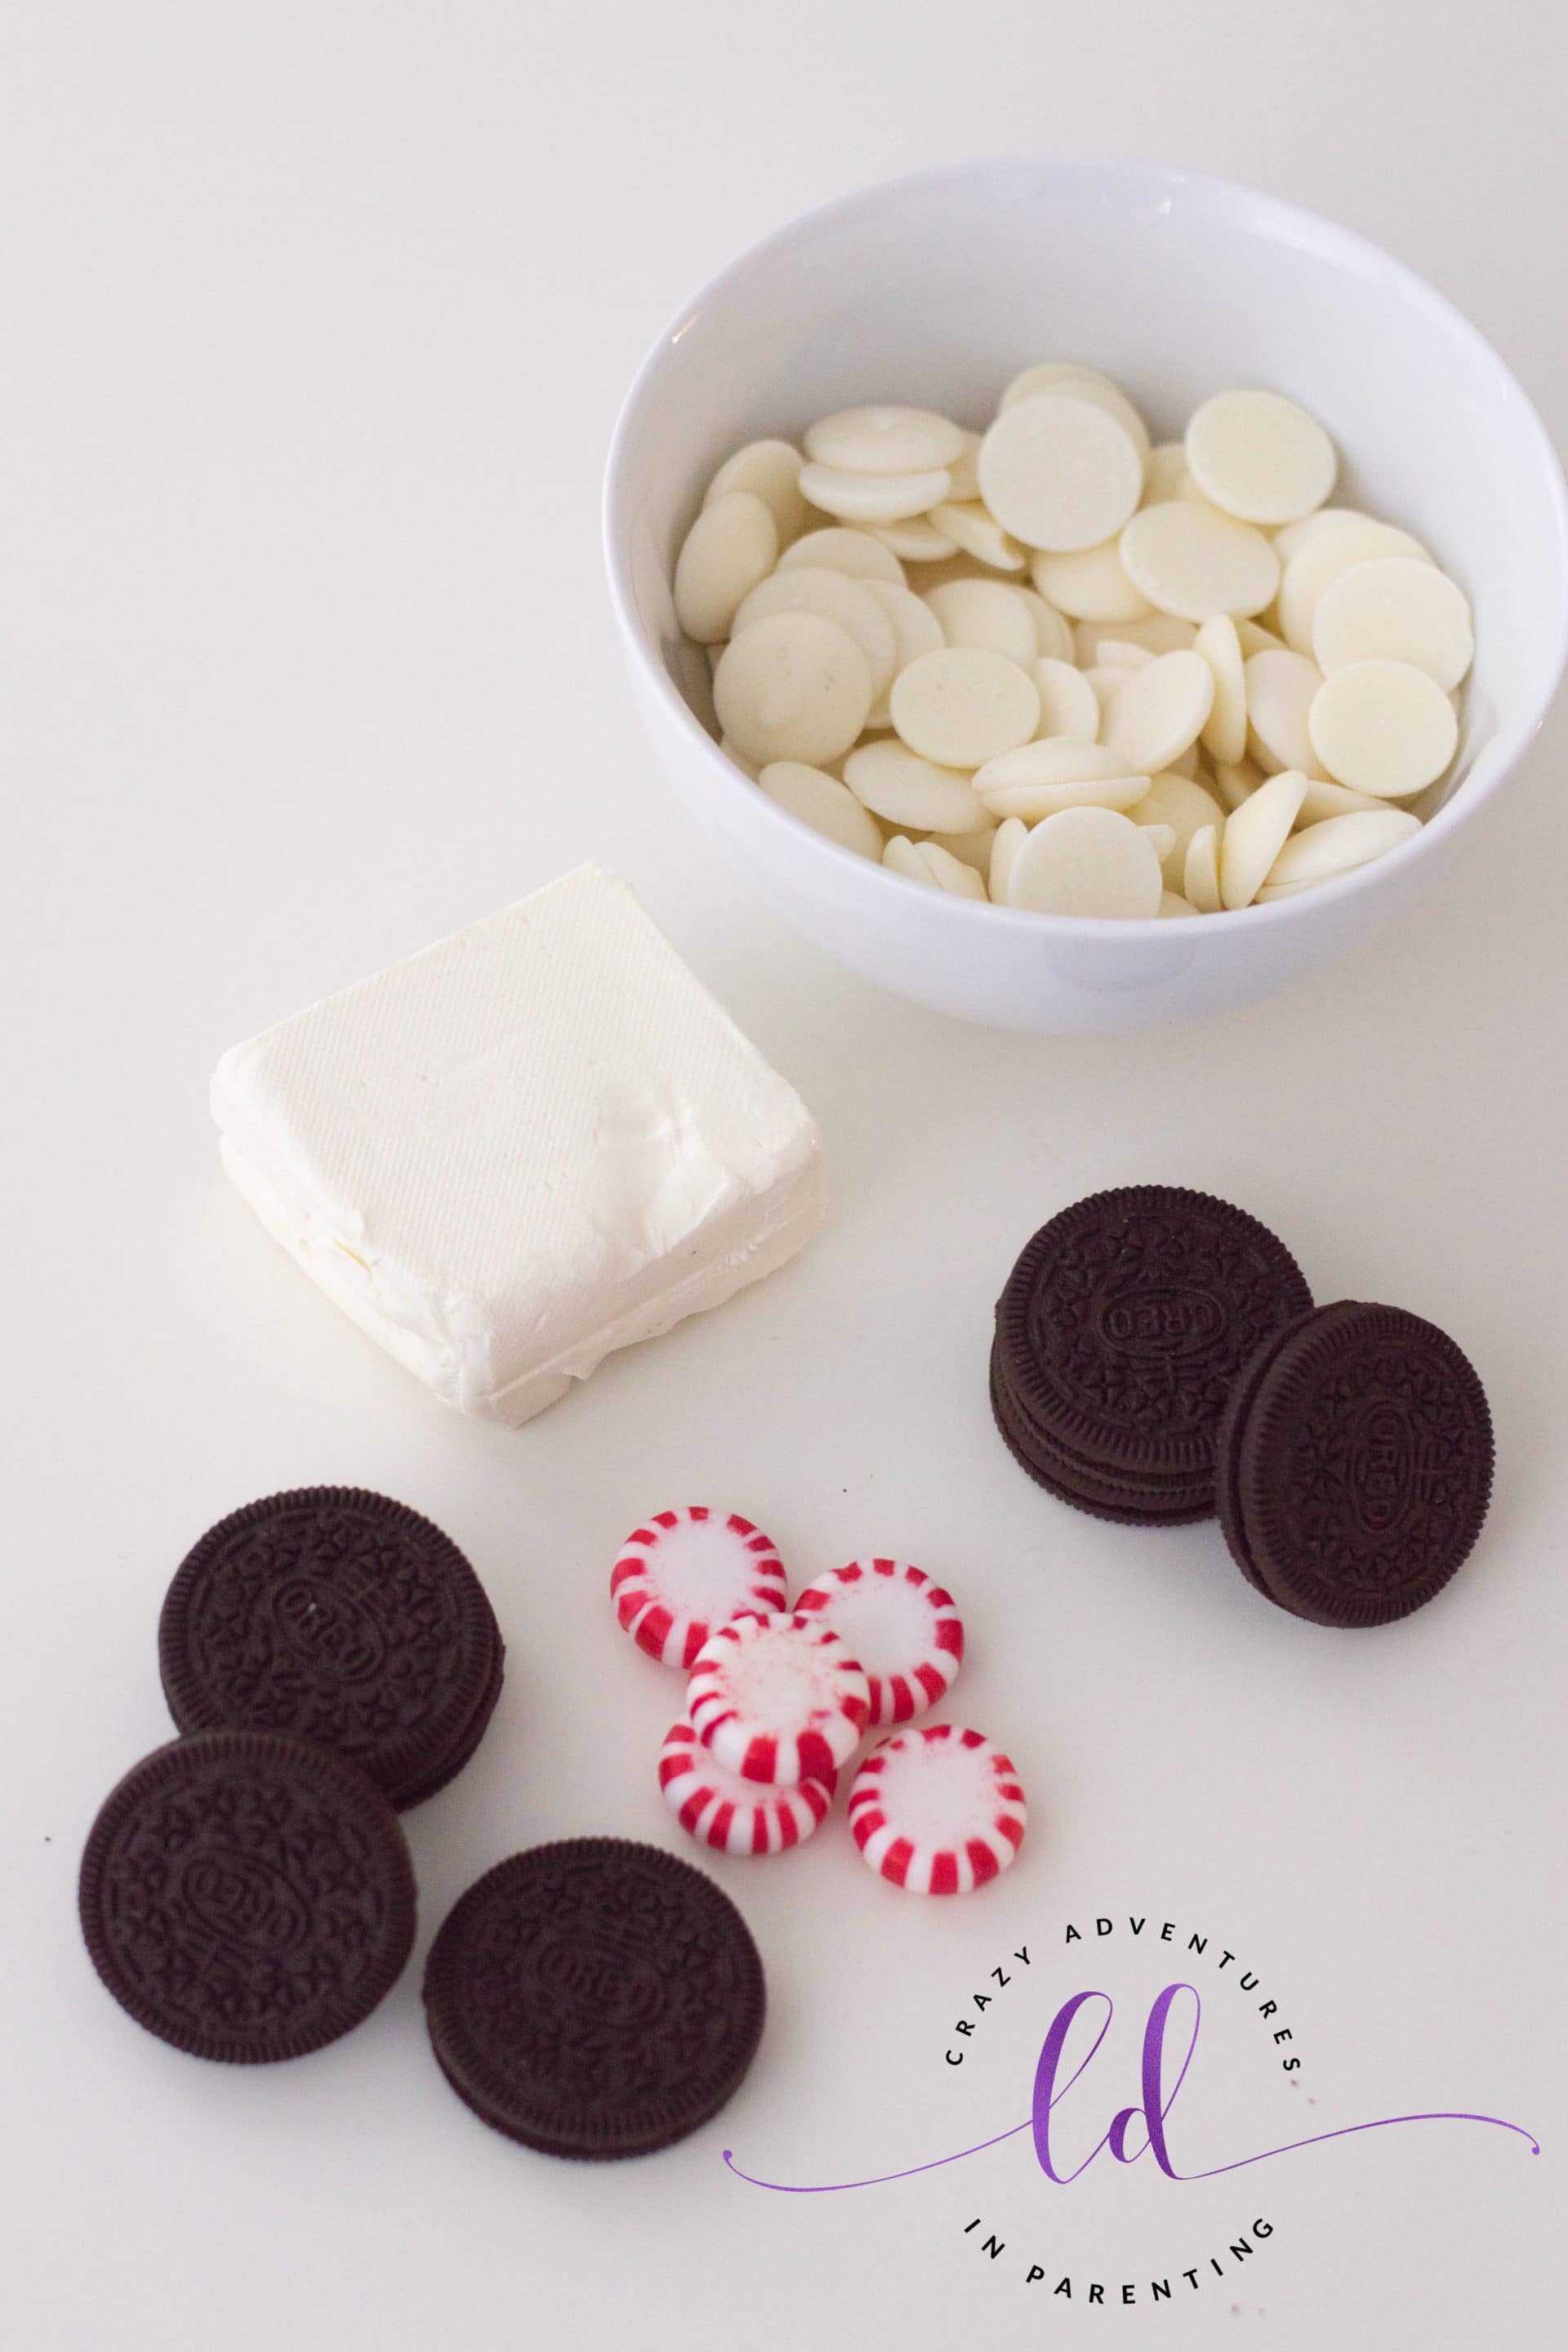 Ingredients to Make Peppermint Oreo Truffles